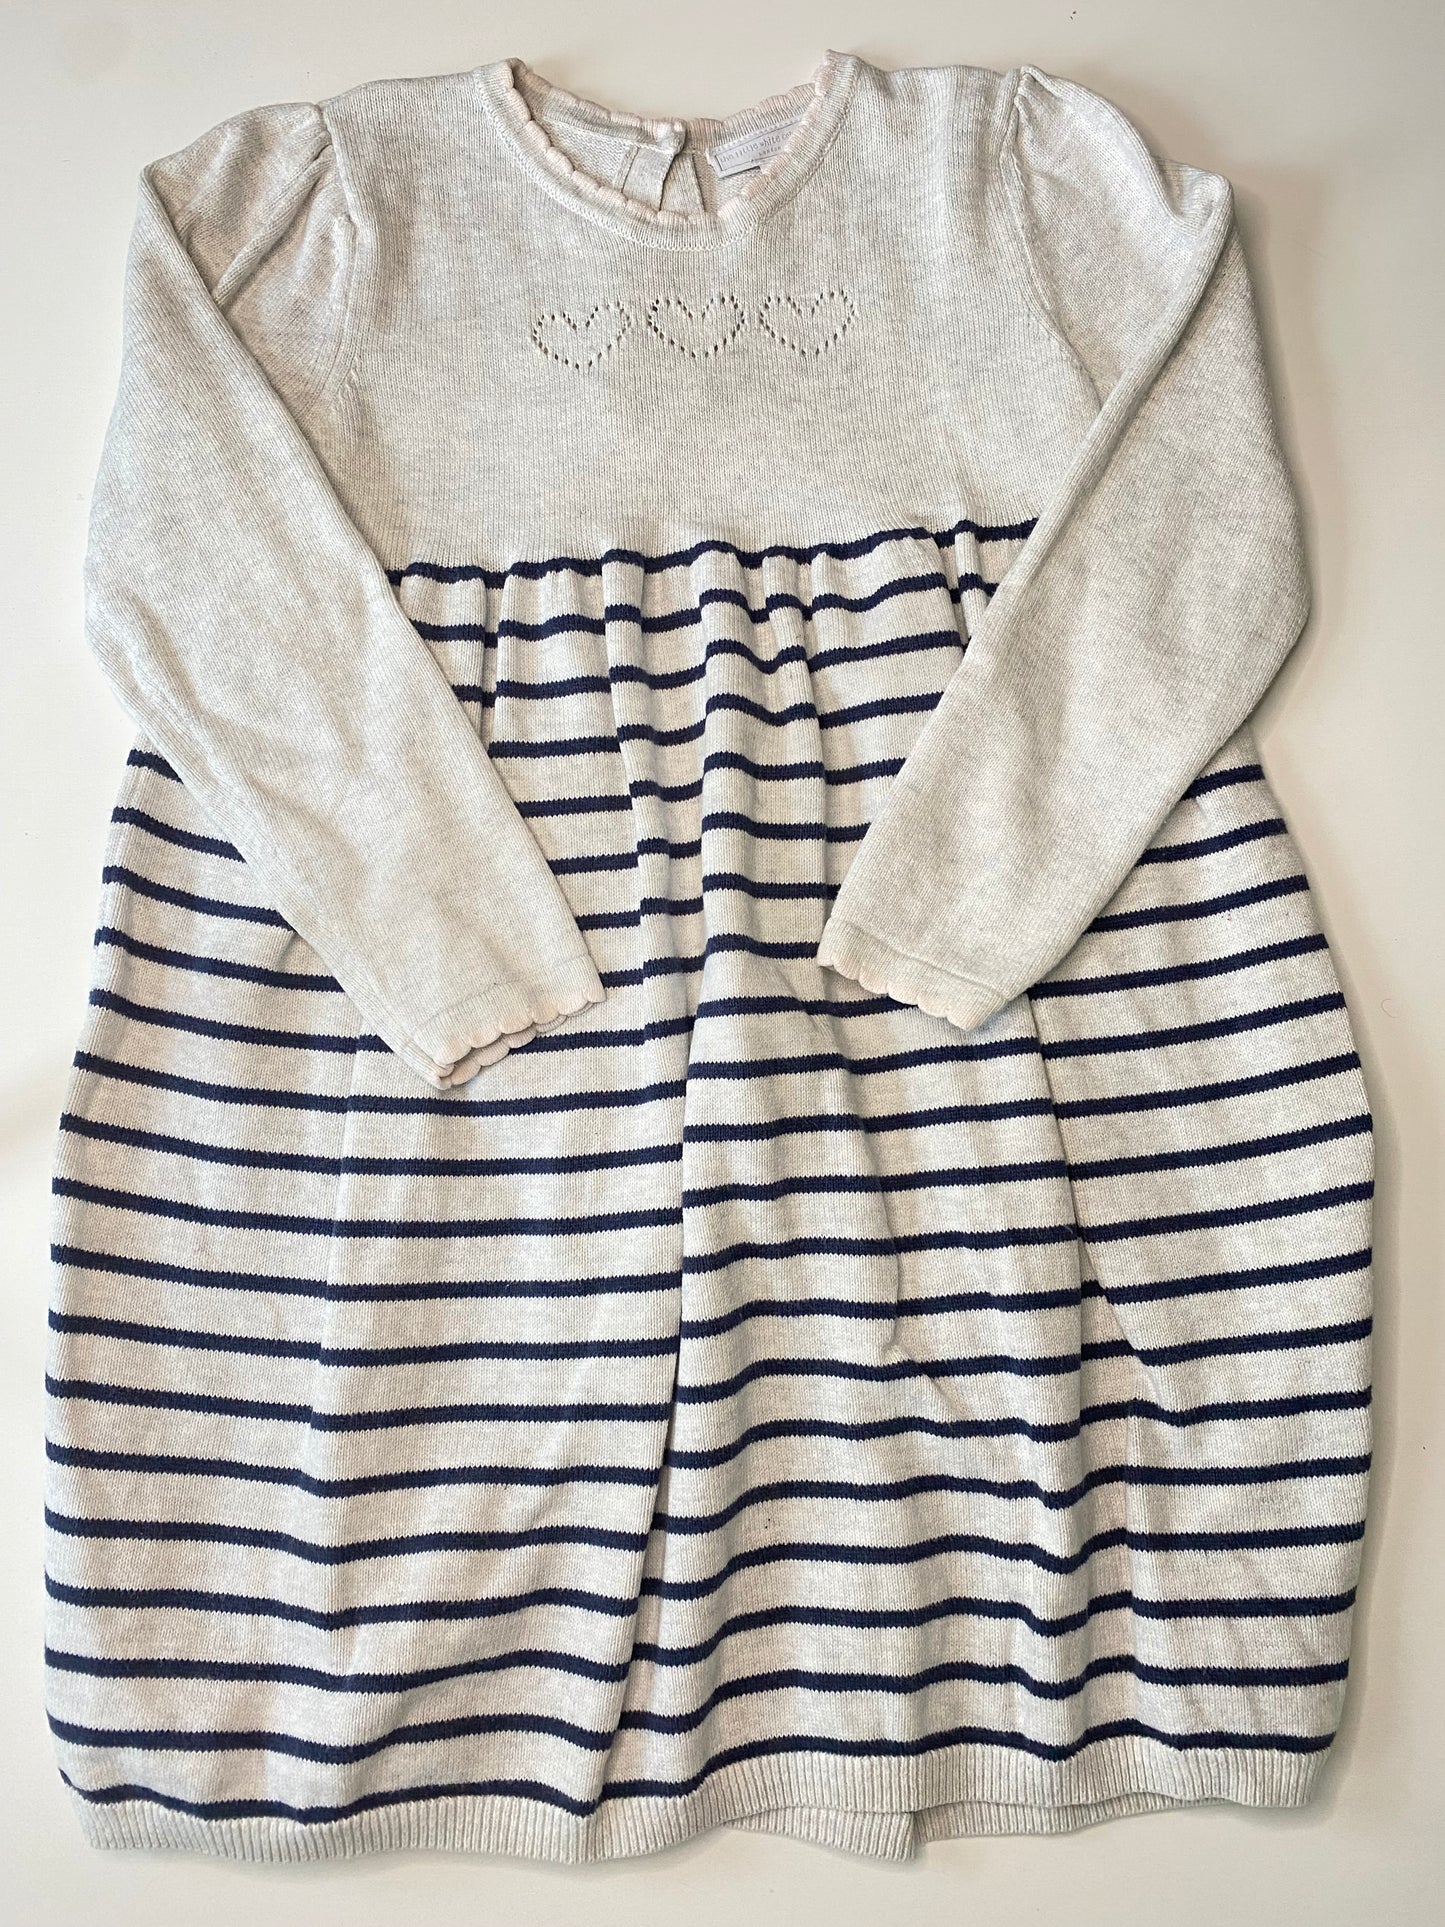 THE LITTLE WHITE COMPANY Knit Dress LS / 5-6Y